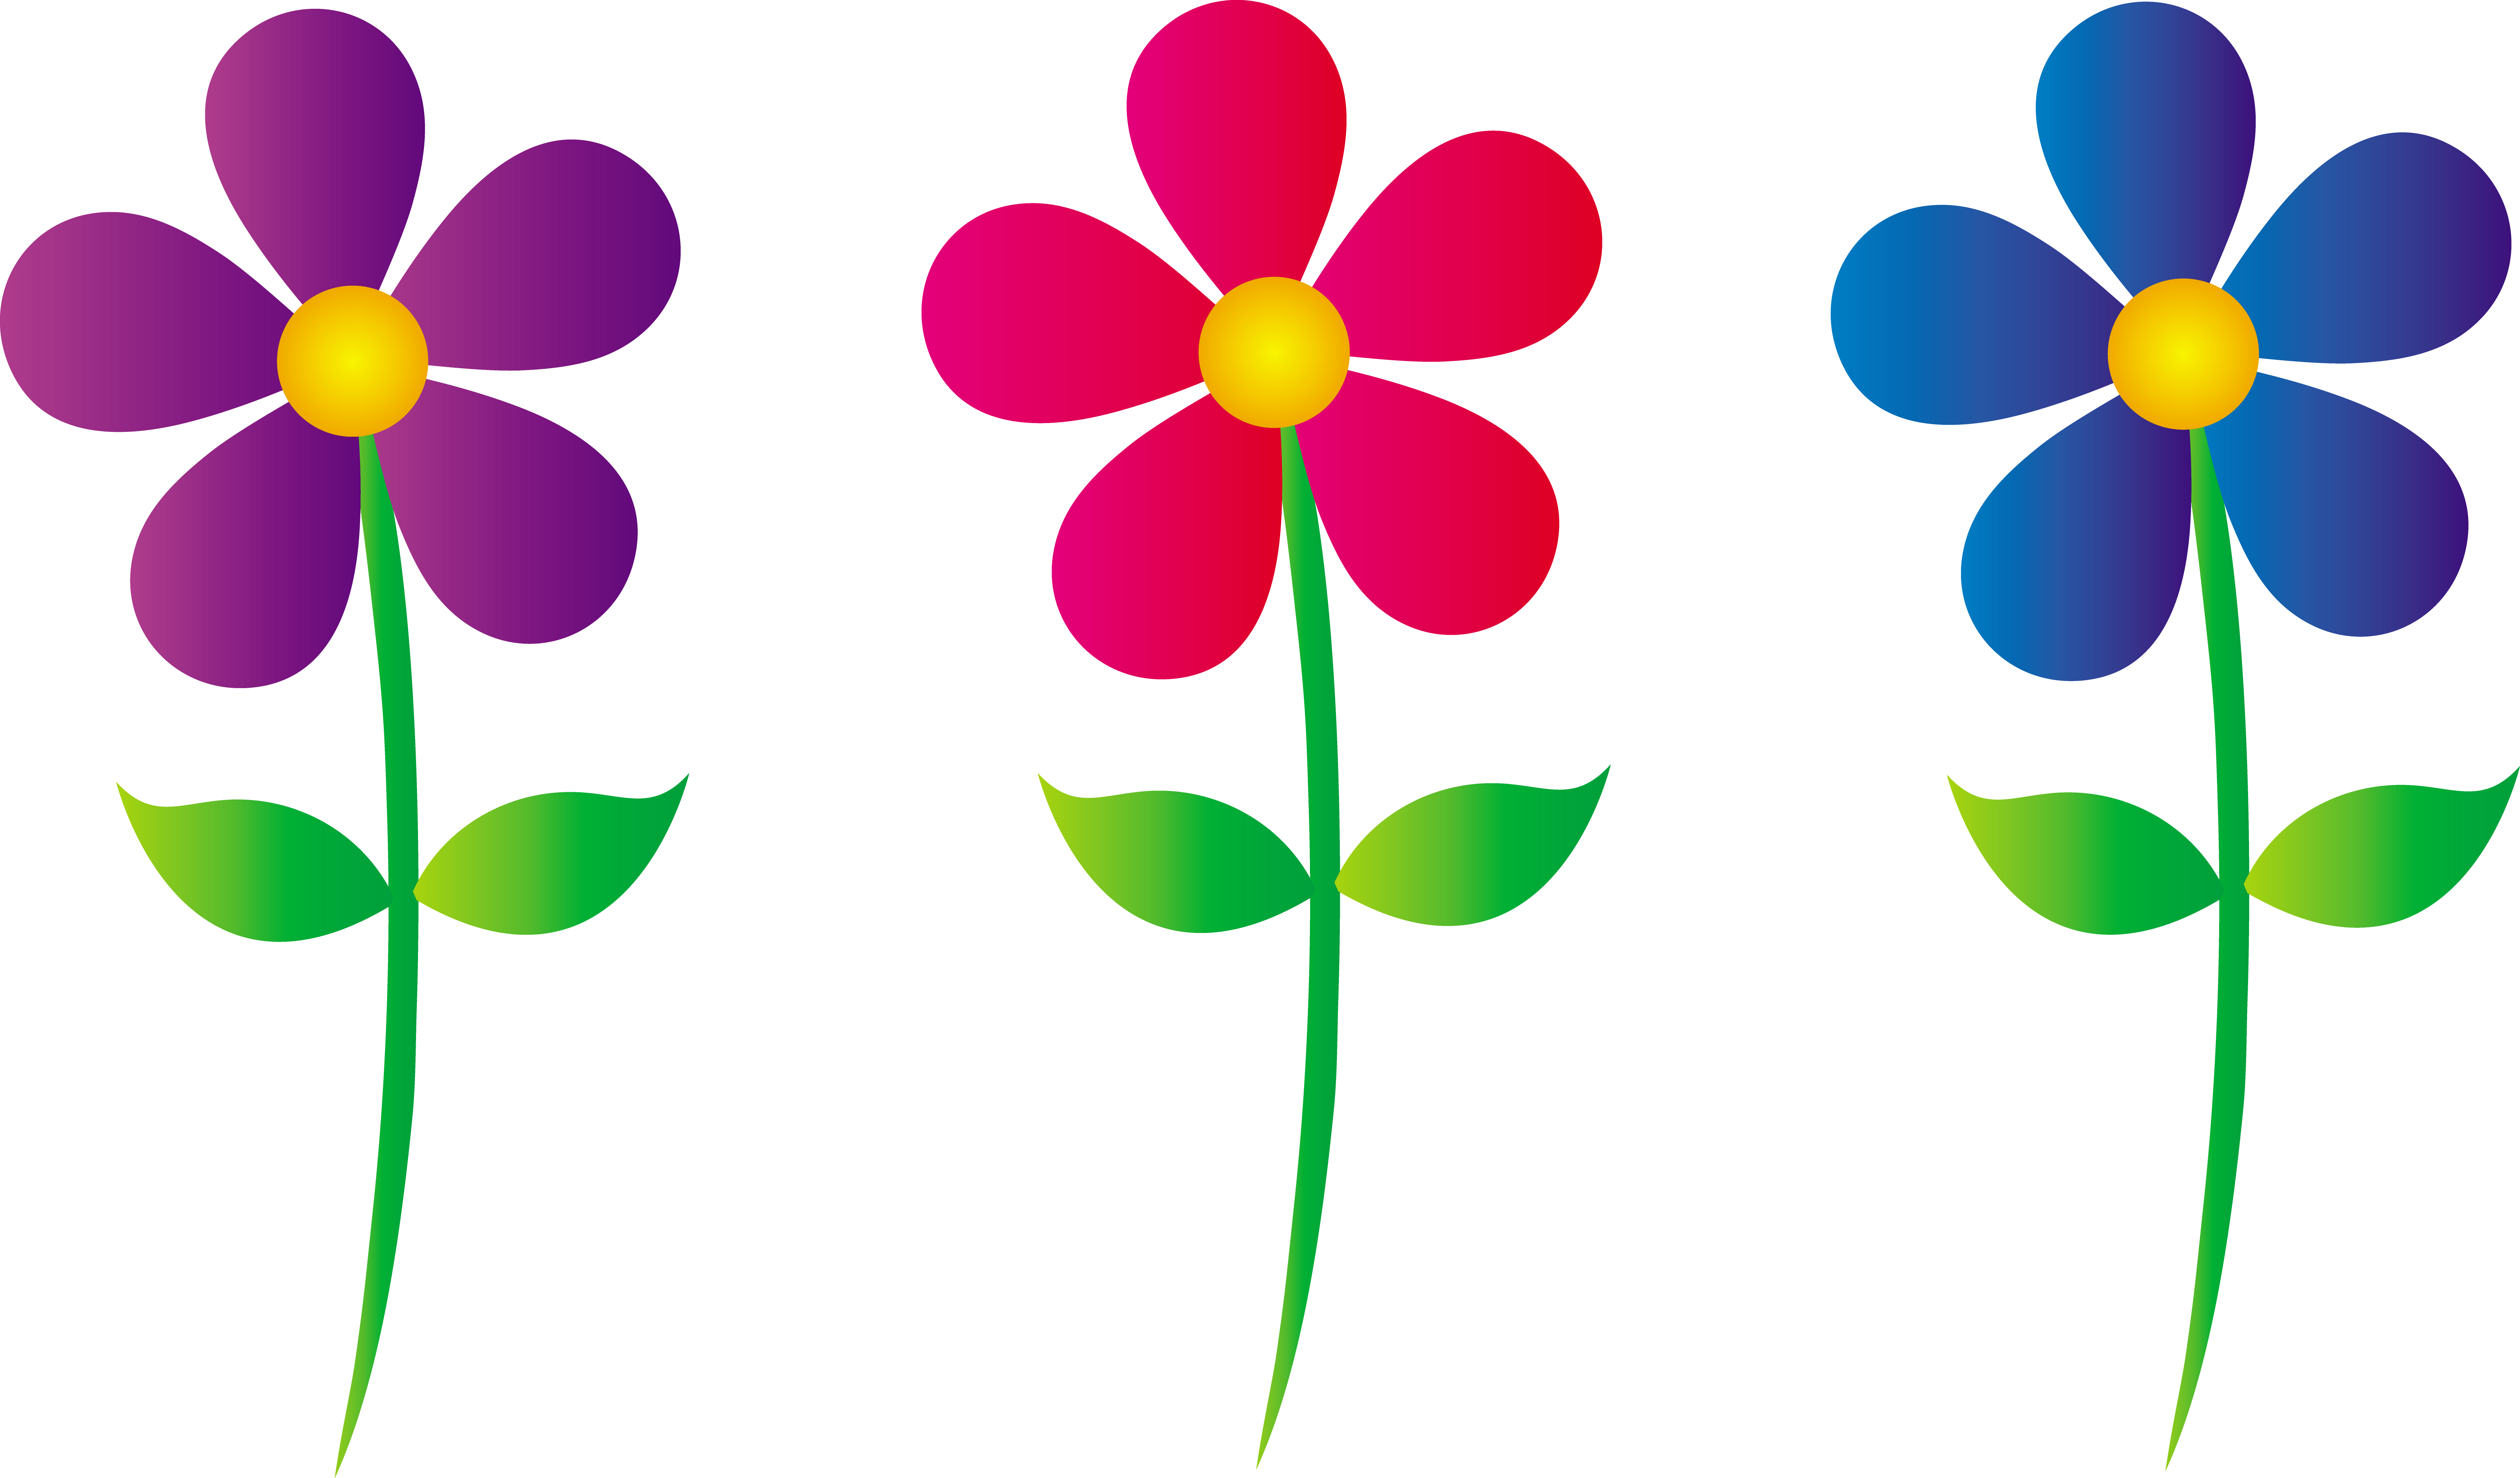 Clipart of flowers and designs